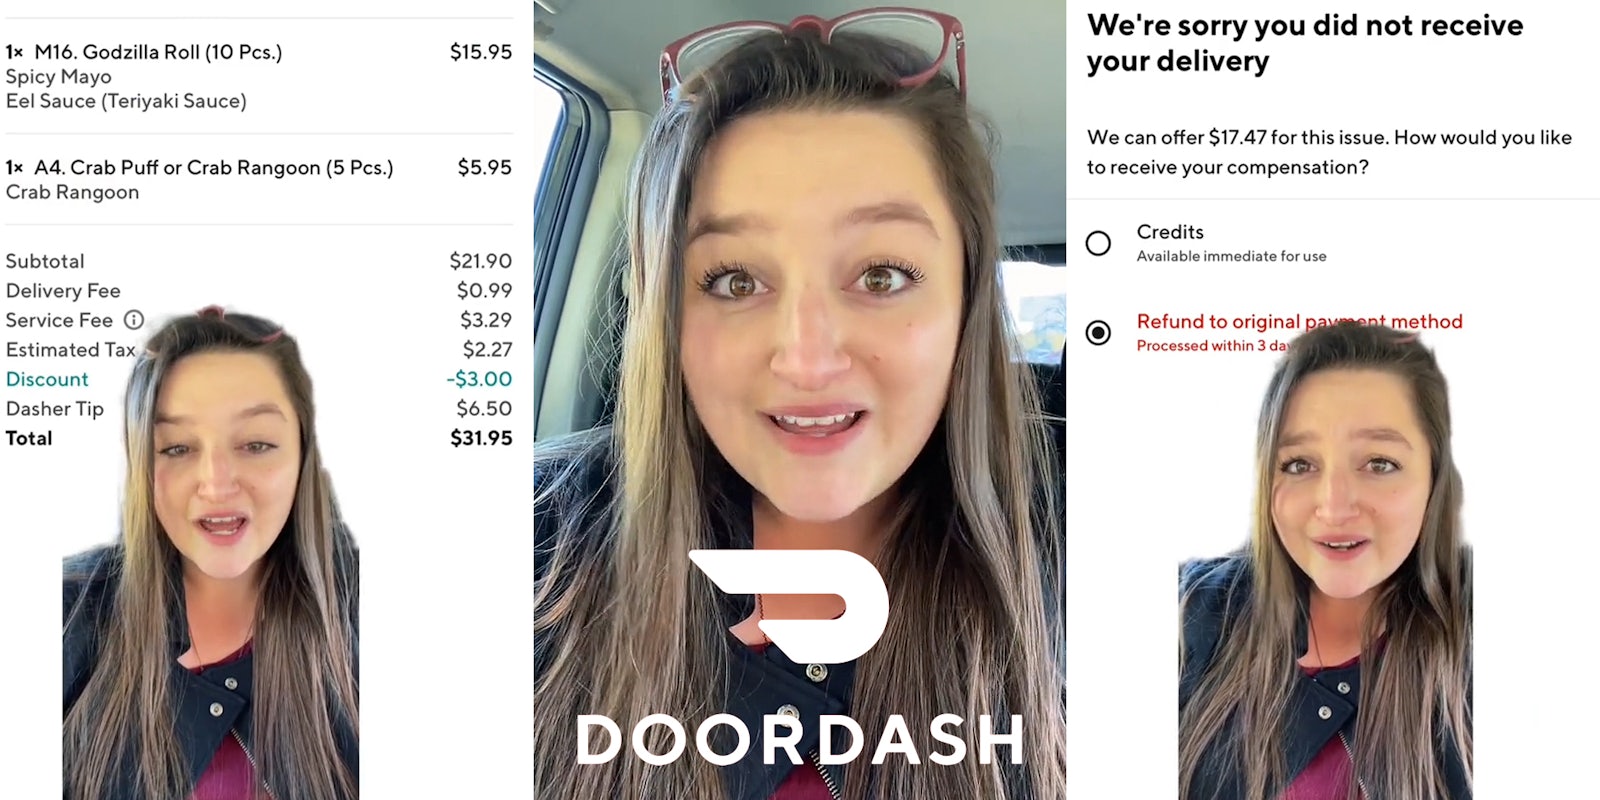 woman greenscreen TikTok over DoorDash checkout with total at '$31.95' (l) woman speaking in car with DoorDash white logo (c) woman greenscreen TikTok over DoorDash 'We're Sorry you did not receive your delivery' 'We can offer $17.47 for this issue. How would you like to receive your compensation' (r)